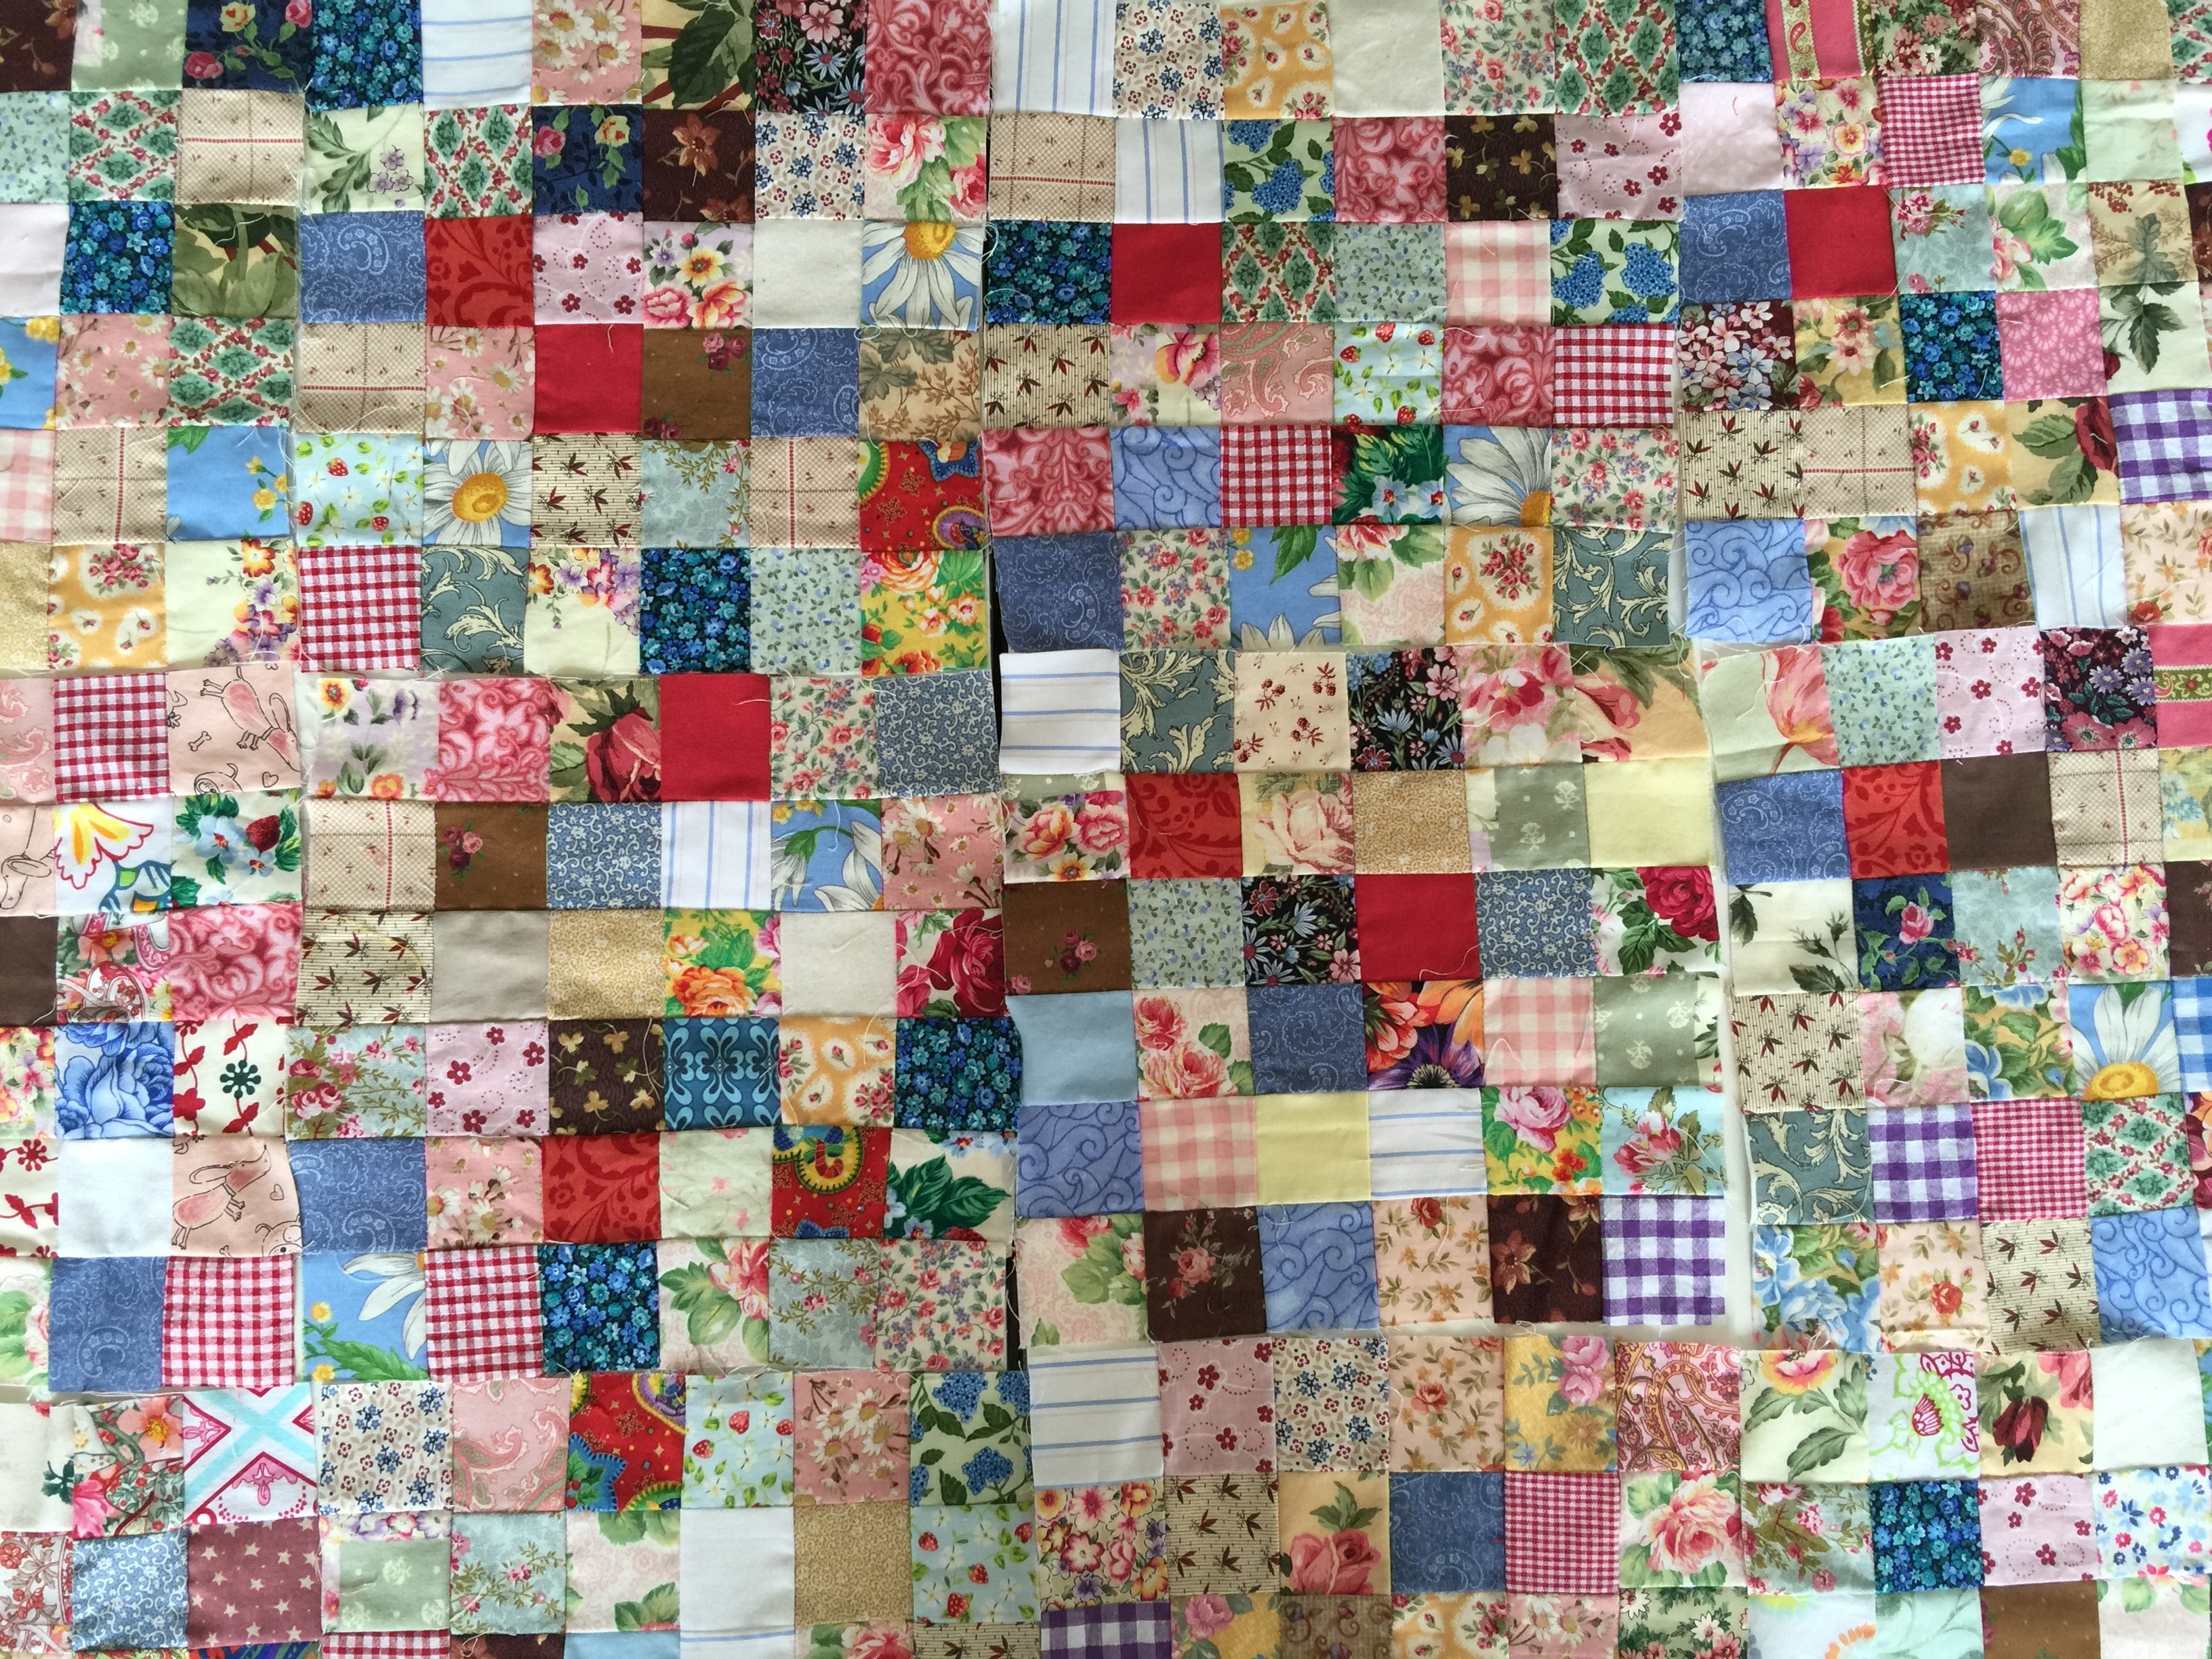 How Many Squares For A 36 By 48 Quilt?